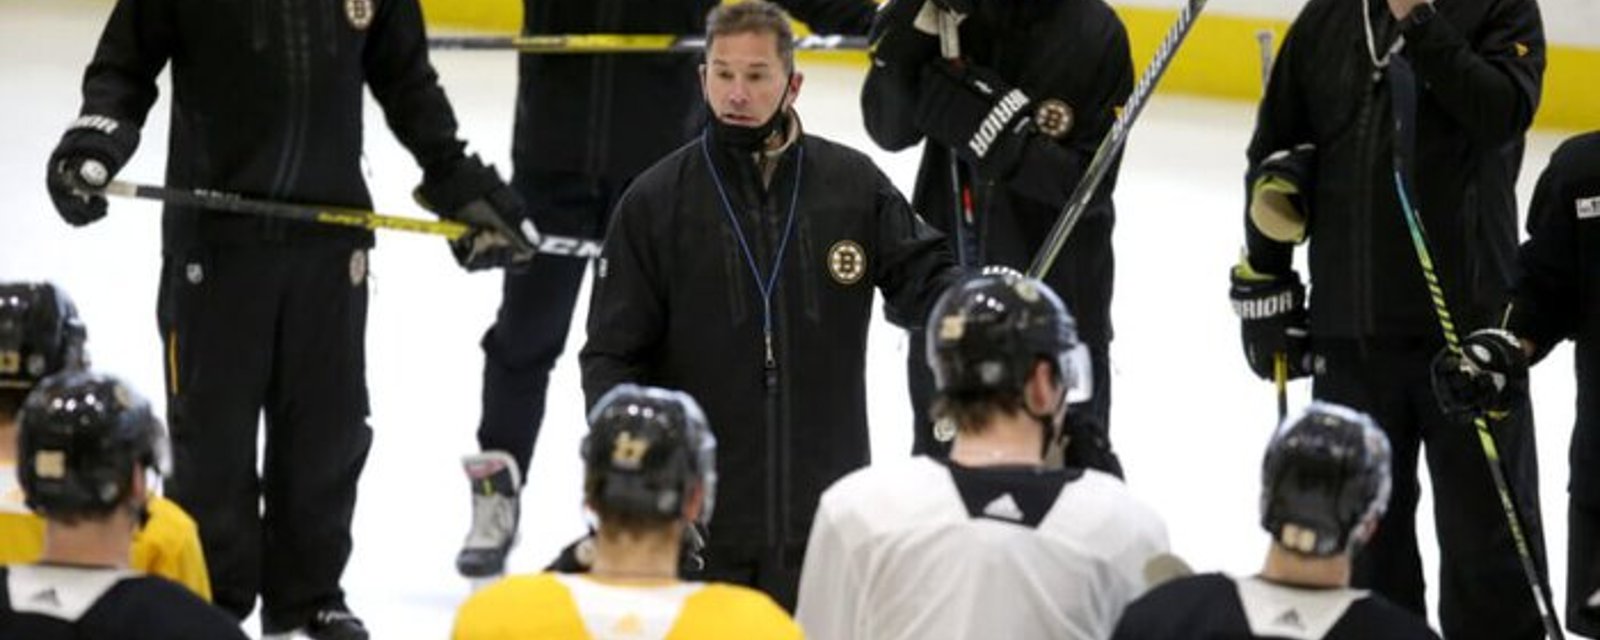 Bruins coach Cassidy flips out and swears at players during practice!